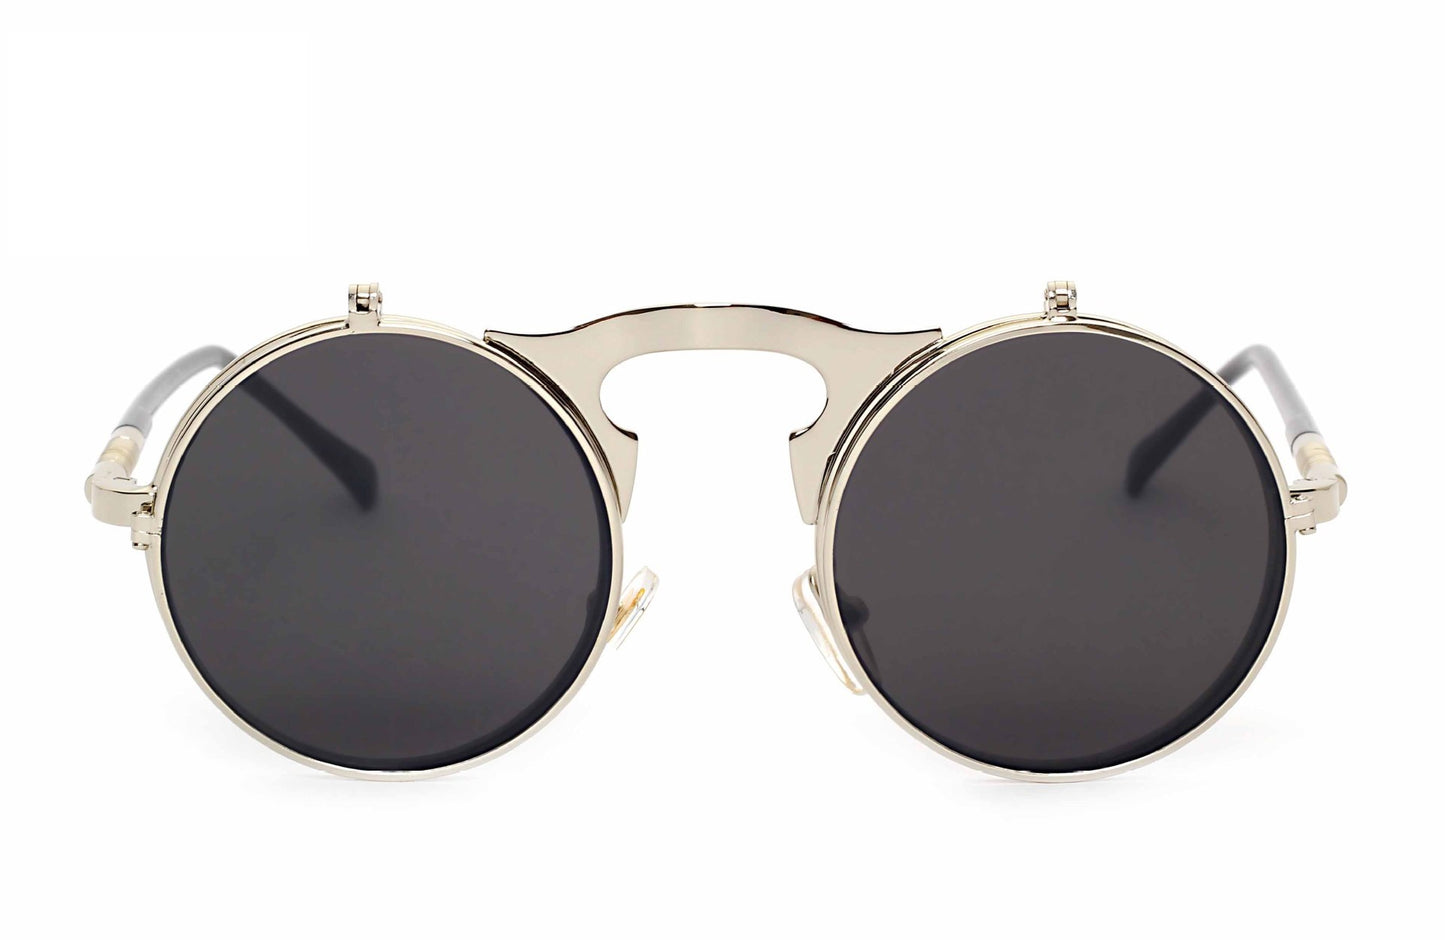 A pair of Maramalive™ Steampunk Flip Sunglasses with an orange and gold design.